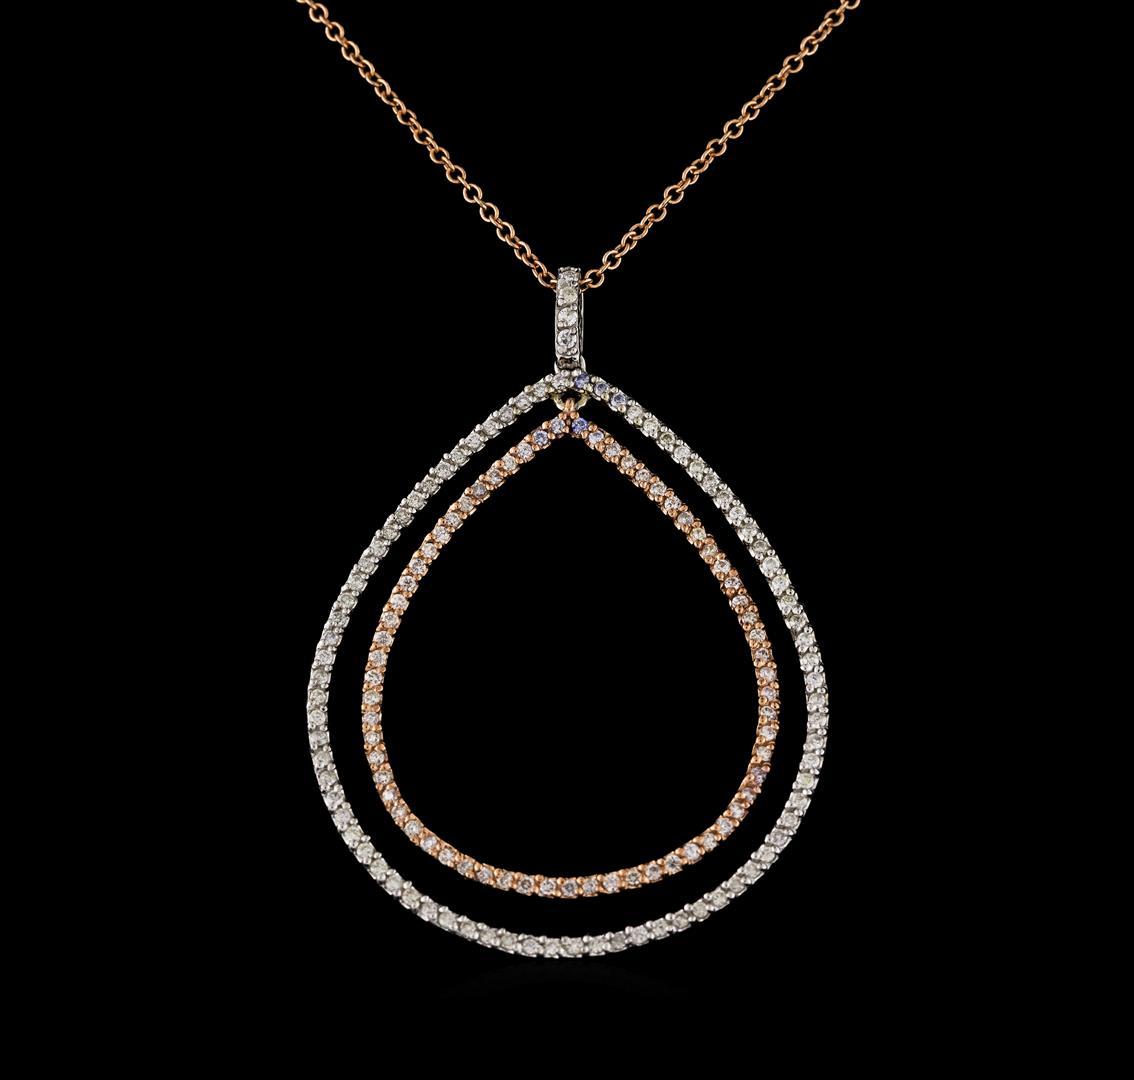 0.75 ctw Diamond Pendant With Chain - 14KT Two-Tone Gold